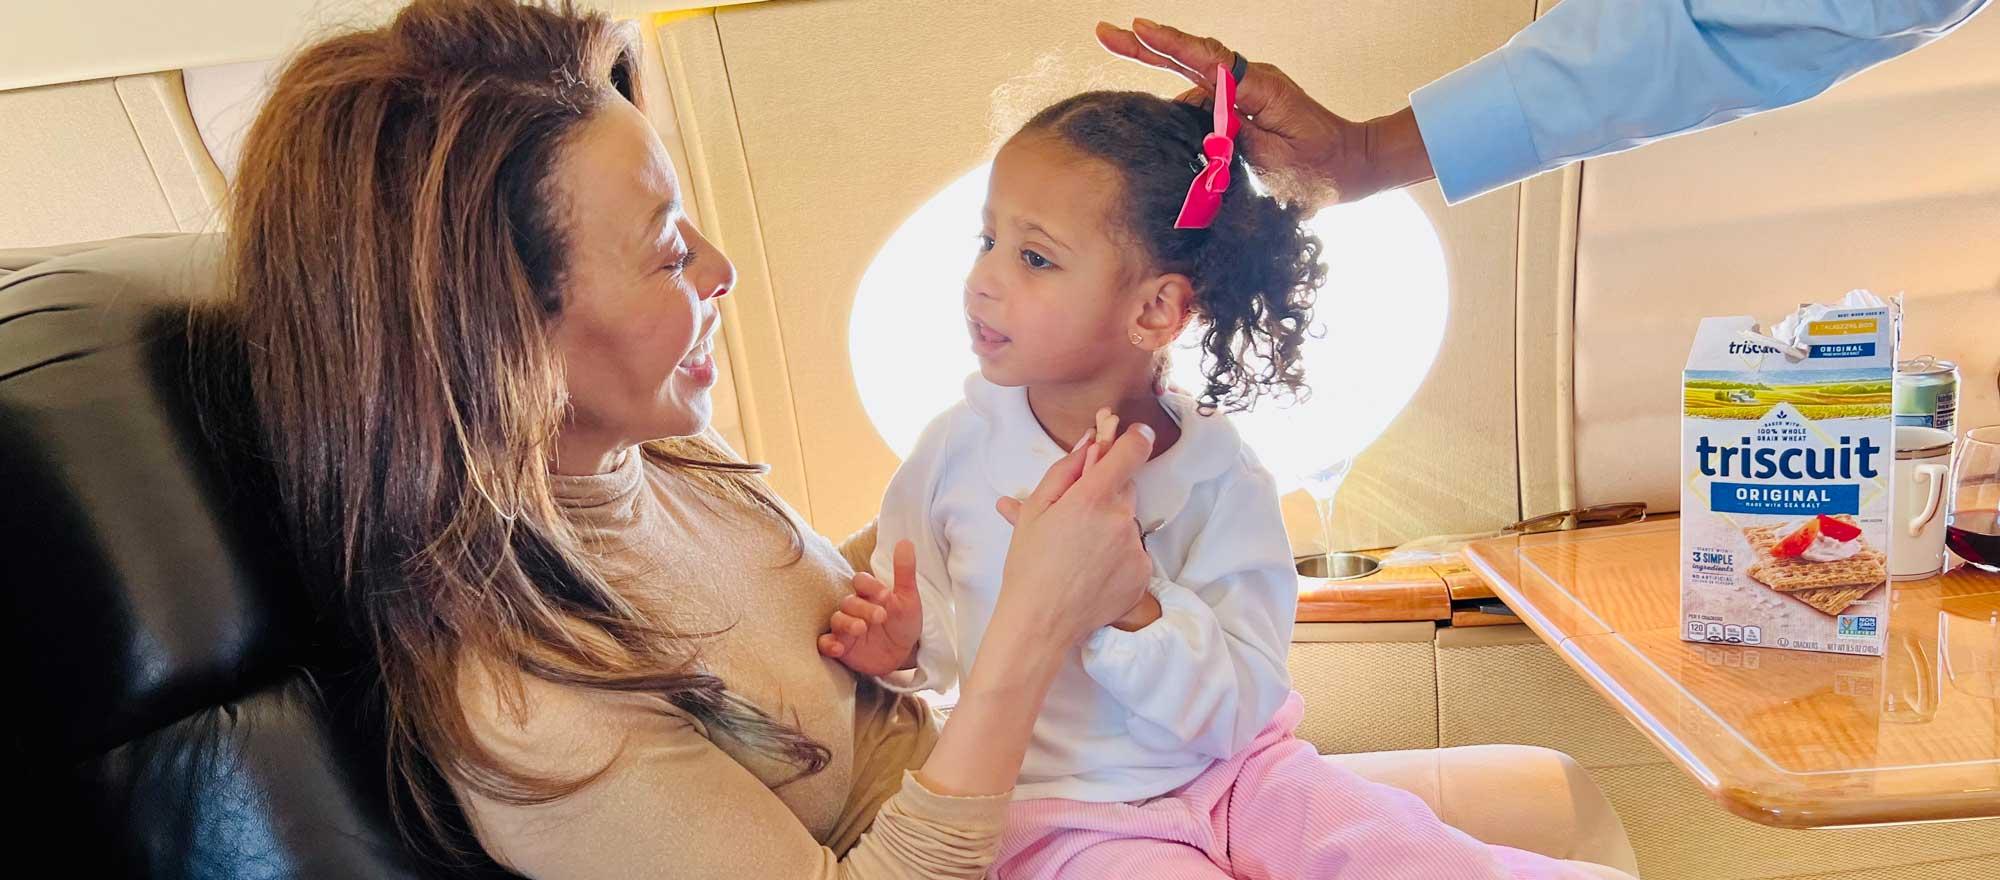 Lisa Simonsen on private jet with child